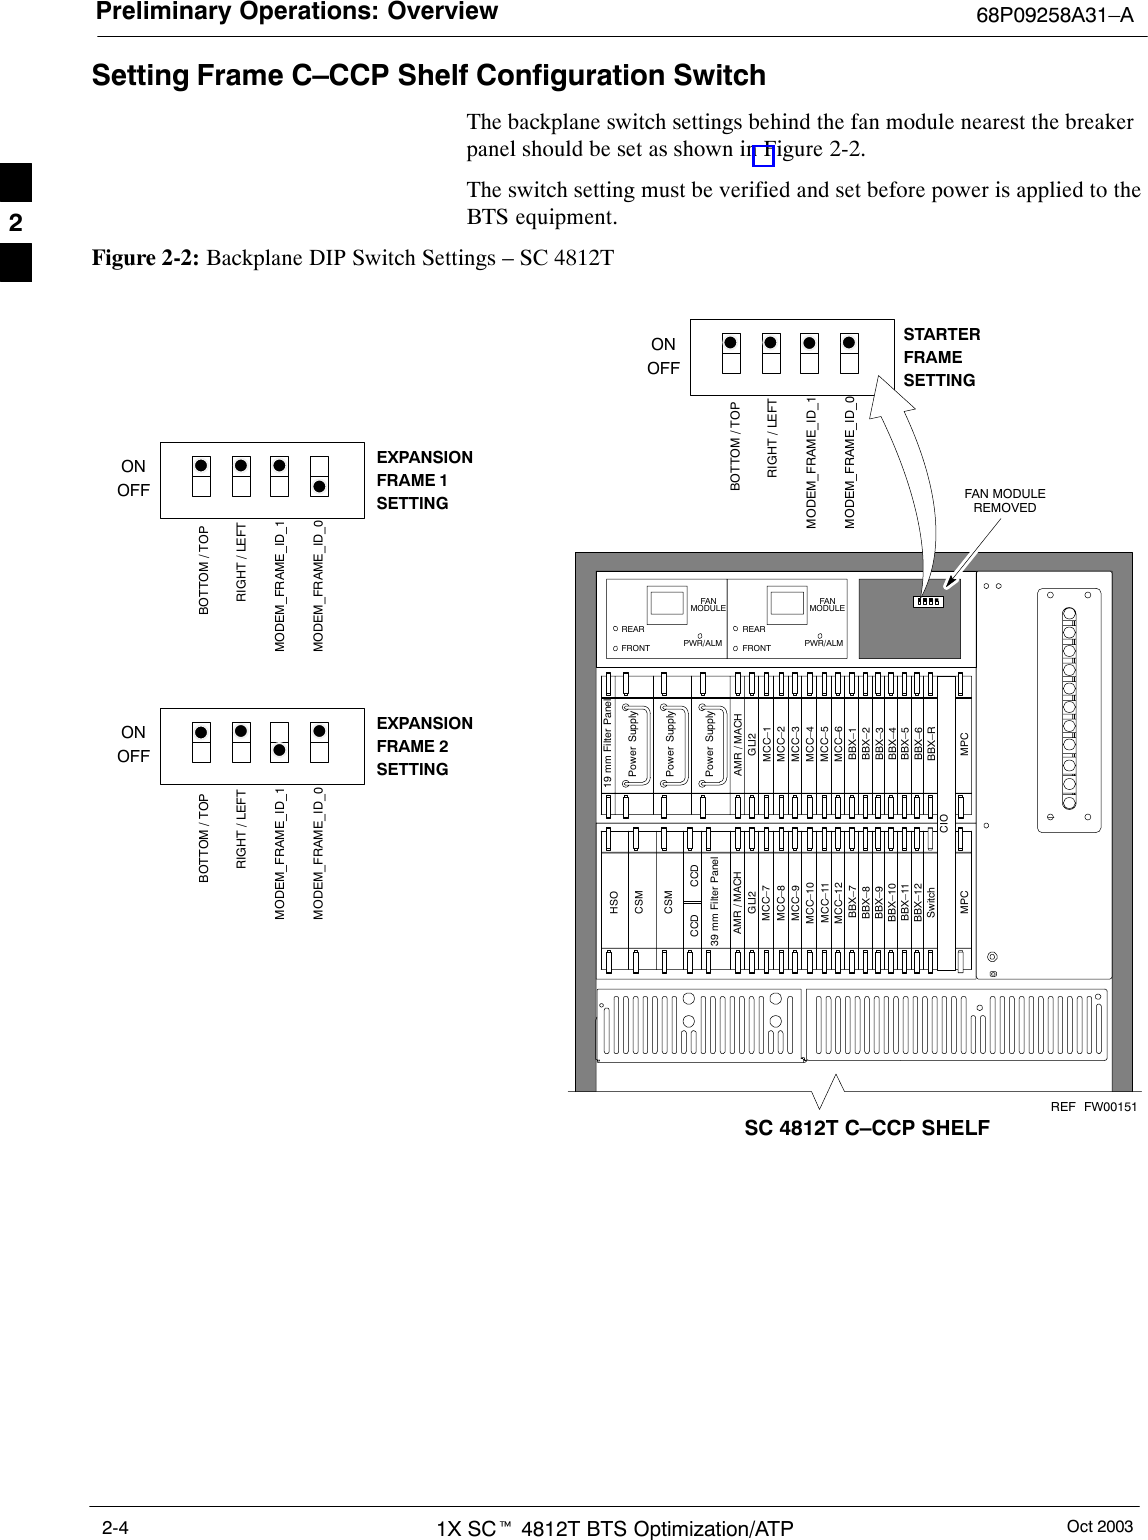 Preliminary Operations: Overview 68P09258A31–AOct 20031X SCt 4812T BTS Optimization/ATP2-4Setting Frame C–CCP Shelf Configuration SwitchThe backplane switch settings behind the fan module nearest the breakerpanel should be set as shown in Figure 2-2.The switch setting must be verified and set before power is applied to theBTS equipment.Figure 2-2: Backplane DIP Switch Settings – SC 4812T19 mm Filter PanelPower SupplyAMR / MACHHSOCSMCSM39 mm Filter PanelAMR / MACHGLI2GLI2MCC–6BBX–1BBX–2BBX–3BBX–4BBX–5BBX–6BBX–RSwitchMPCMPCCIOBBX–7BBX–8BBX–9BBX–10BBX–11BBX–12MCC–5MCC–4MCC–3MCC–2MCC–1MCC–12MCC–11MCC–10MCC–9MCC–8MCC–7Power SupplyPower SupplyCCD CCDFANMODULEPWR/ALMREARFRONTFANMODULEPWR/ALMREARFRONTONOFFSC 4812T C–CCP SHELFFAN MODULEREMOVEDSTARTERFRAMESETTINGONOFFEXPANSIONFRAME 1SETTINGONOFFEXPANSIONFRAME 2SETTINGBOTTOM / TOPRIGHT / LEFTMODEM_FRAME_ID_1MODEM_FRAME_ID_0BOTTOM / TOPRIGHT / LEFTMODEM_FRAME_ID_1MODEM_FRAME_ID_0BOTTOM / TOPRIGHT / LEFTMODEM_FRAME_ID_1MODEM_FRAME_ID_0FW00151REF2